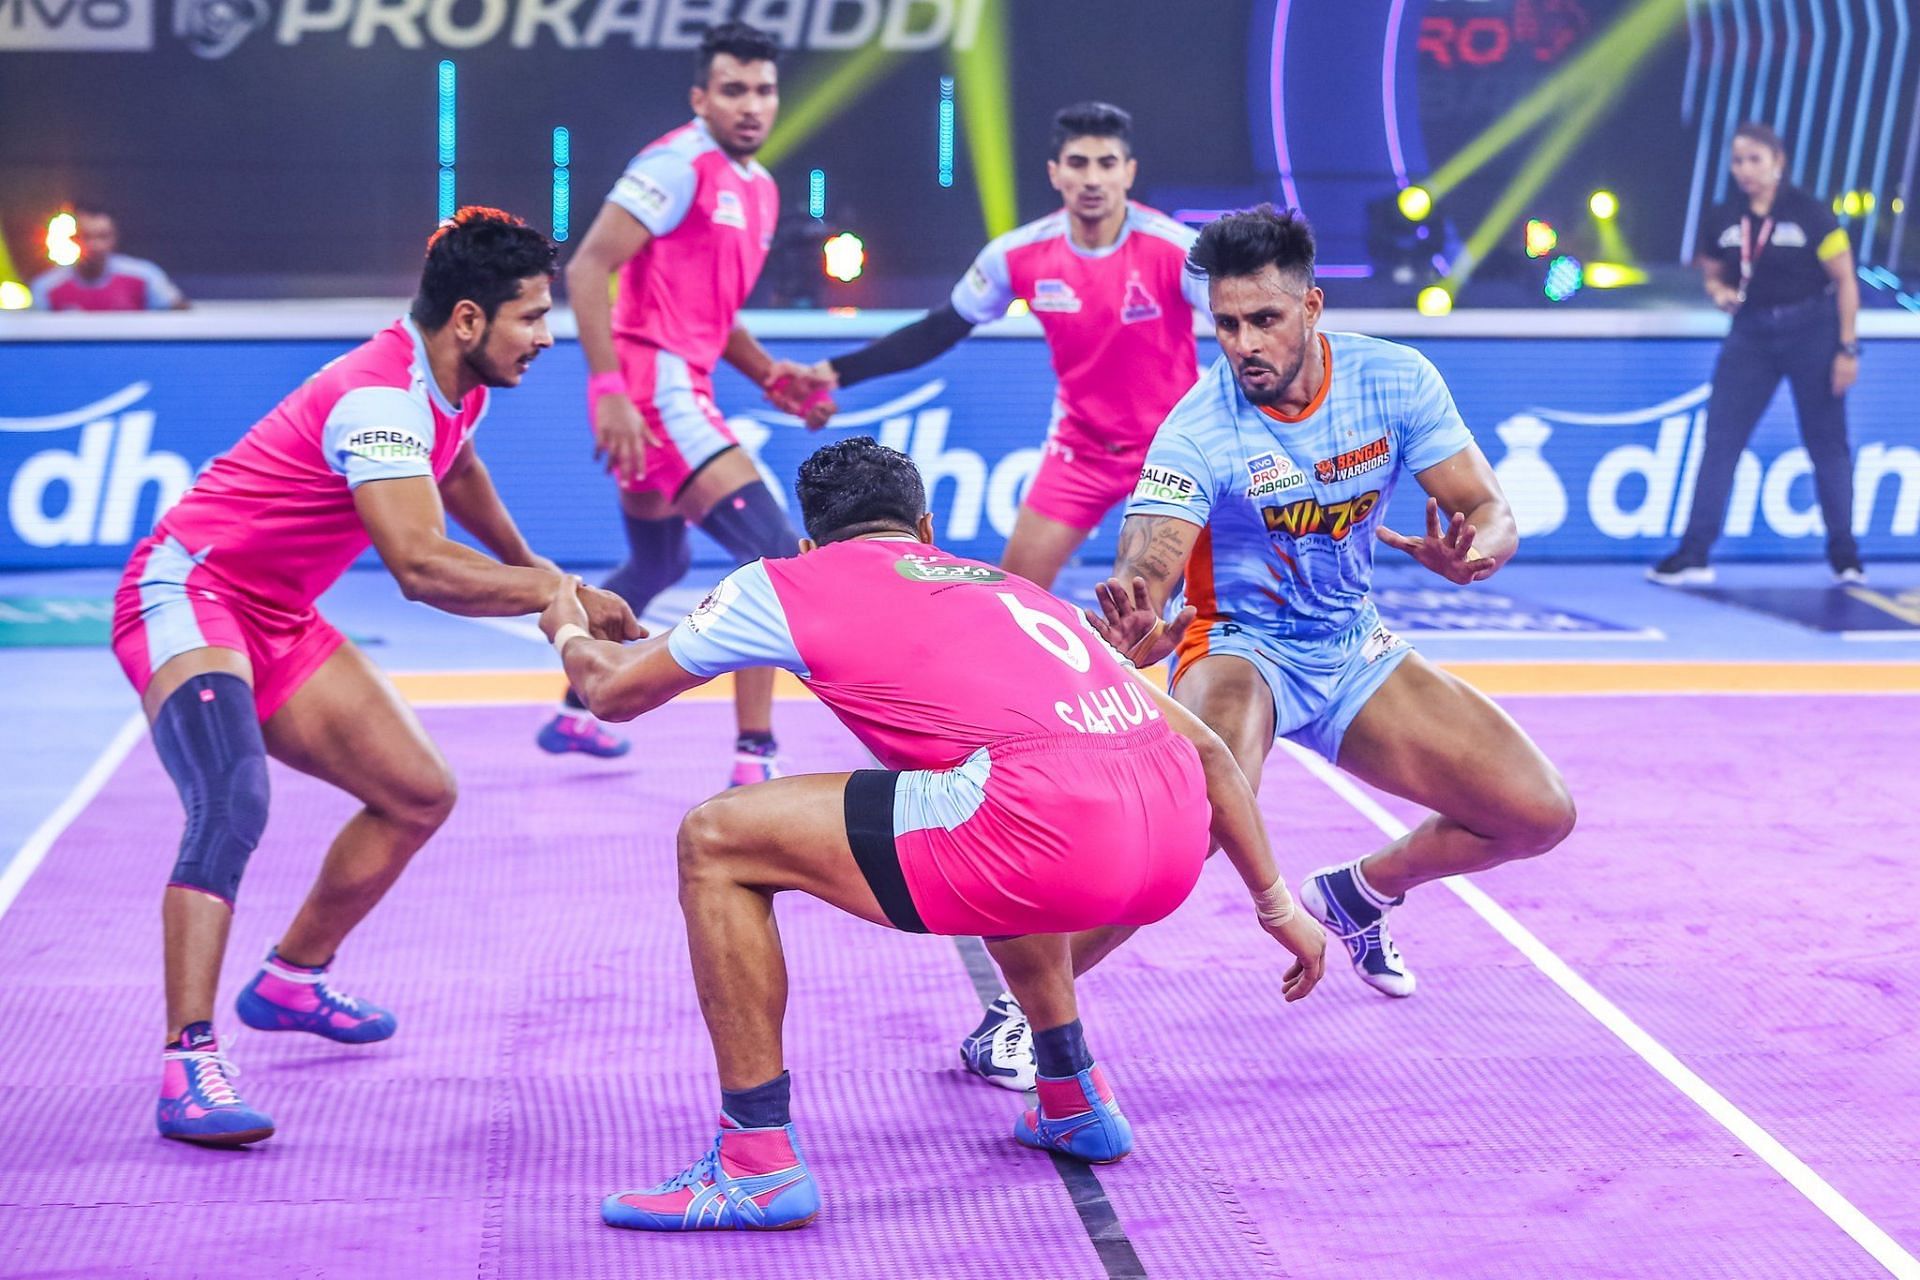 Jaipur Pink Panthers in action against the Bengal Warriors - Image Courtesy: Jaipur Pink Panthers Twitter